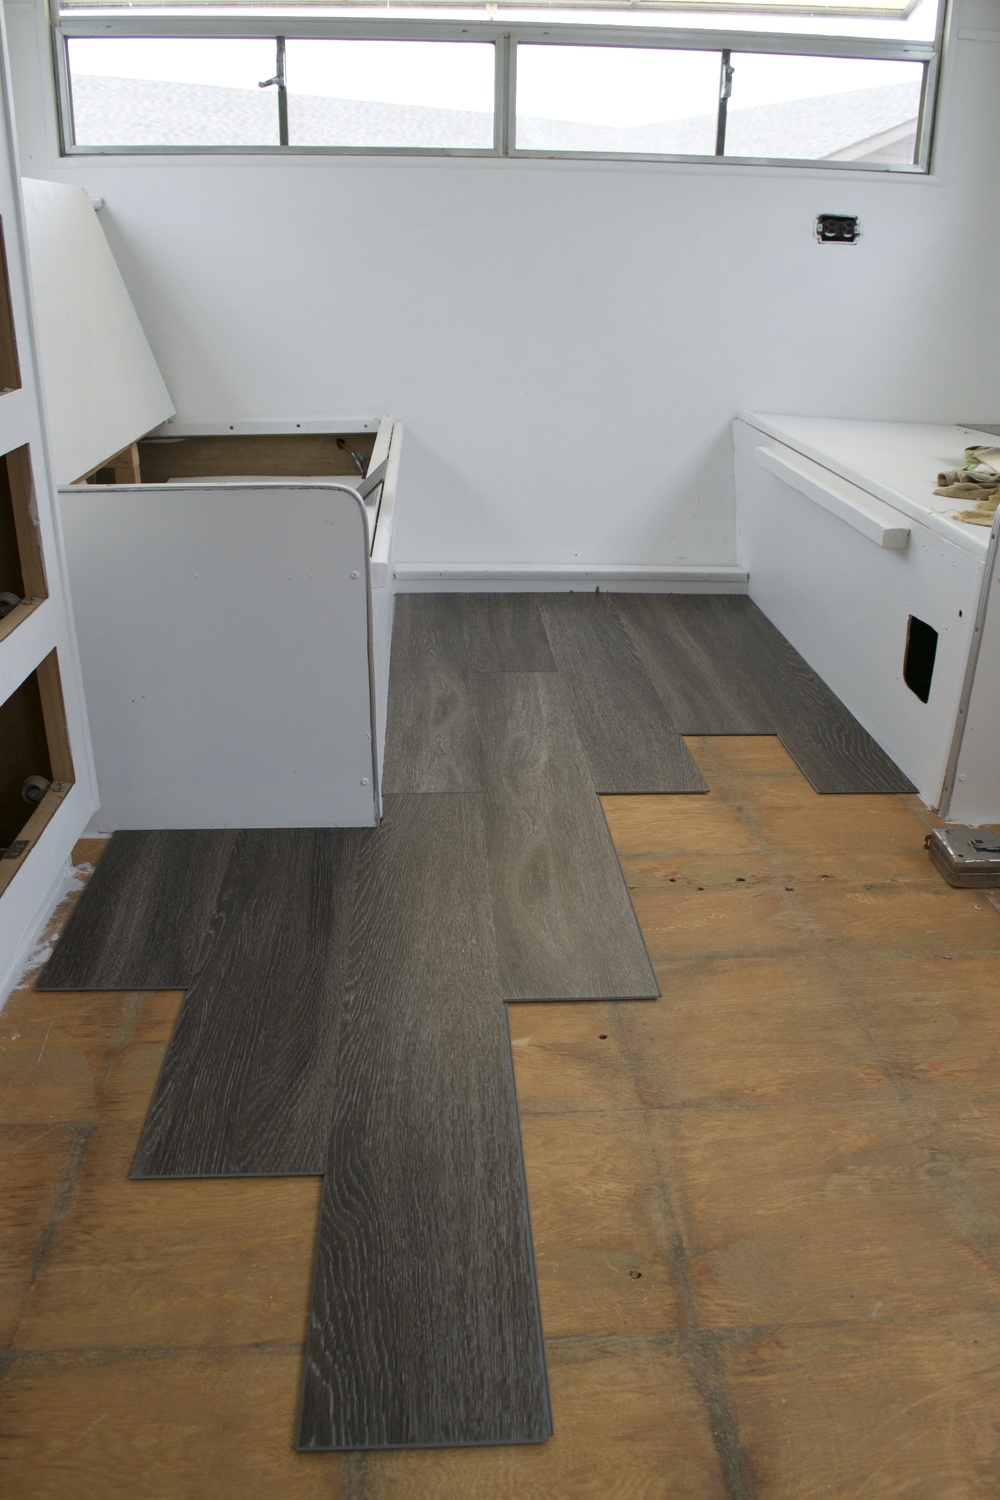 Reasons To Install Vinyl Plank Flooring, How To Install Vinyl Plank Flooring In Rv